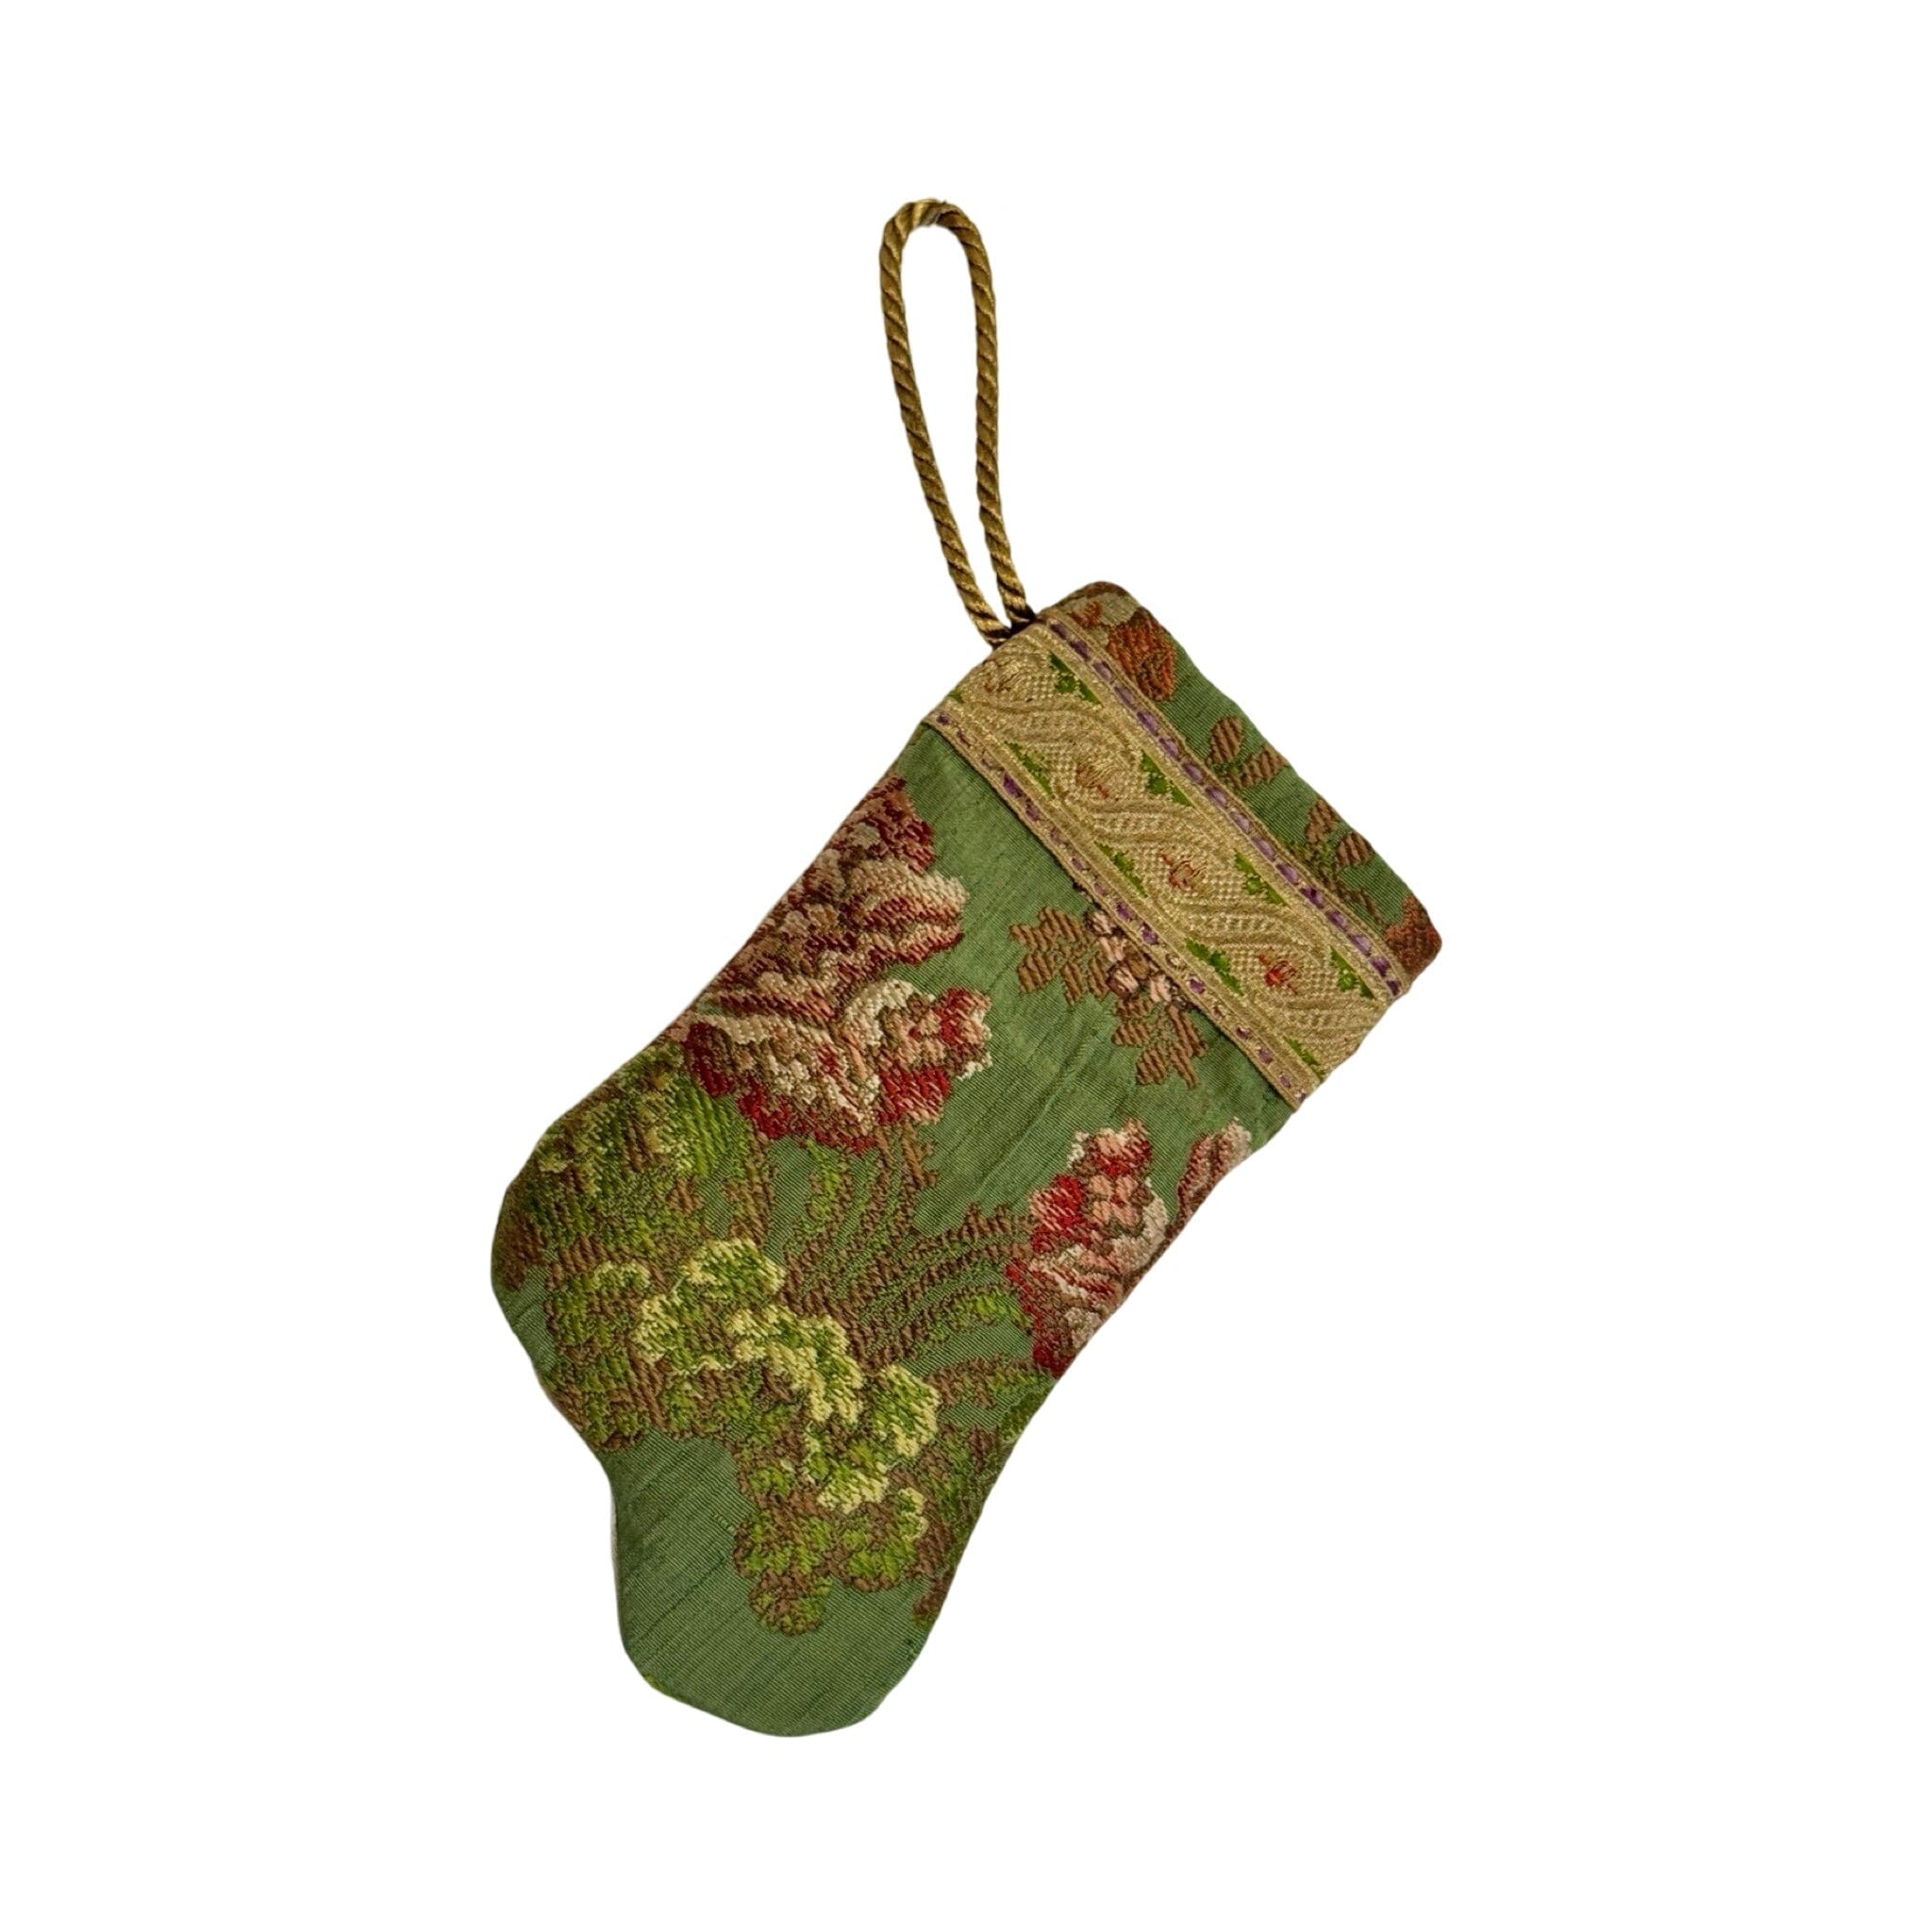 Handmade Mini Stocking Made From Vintage Fabric and Trims- Green Floral Ornament B. Viz Design D 